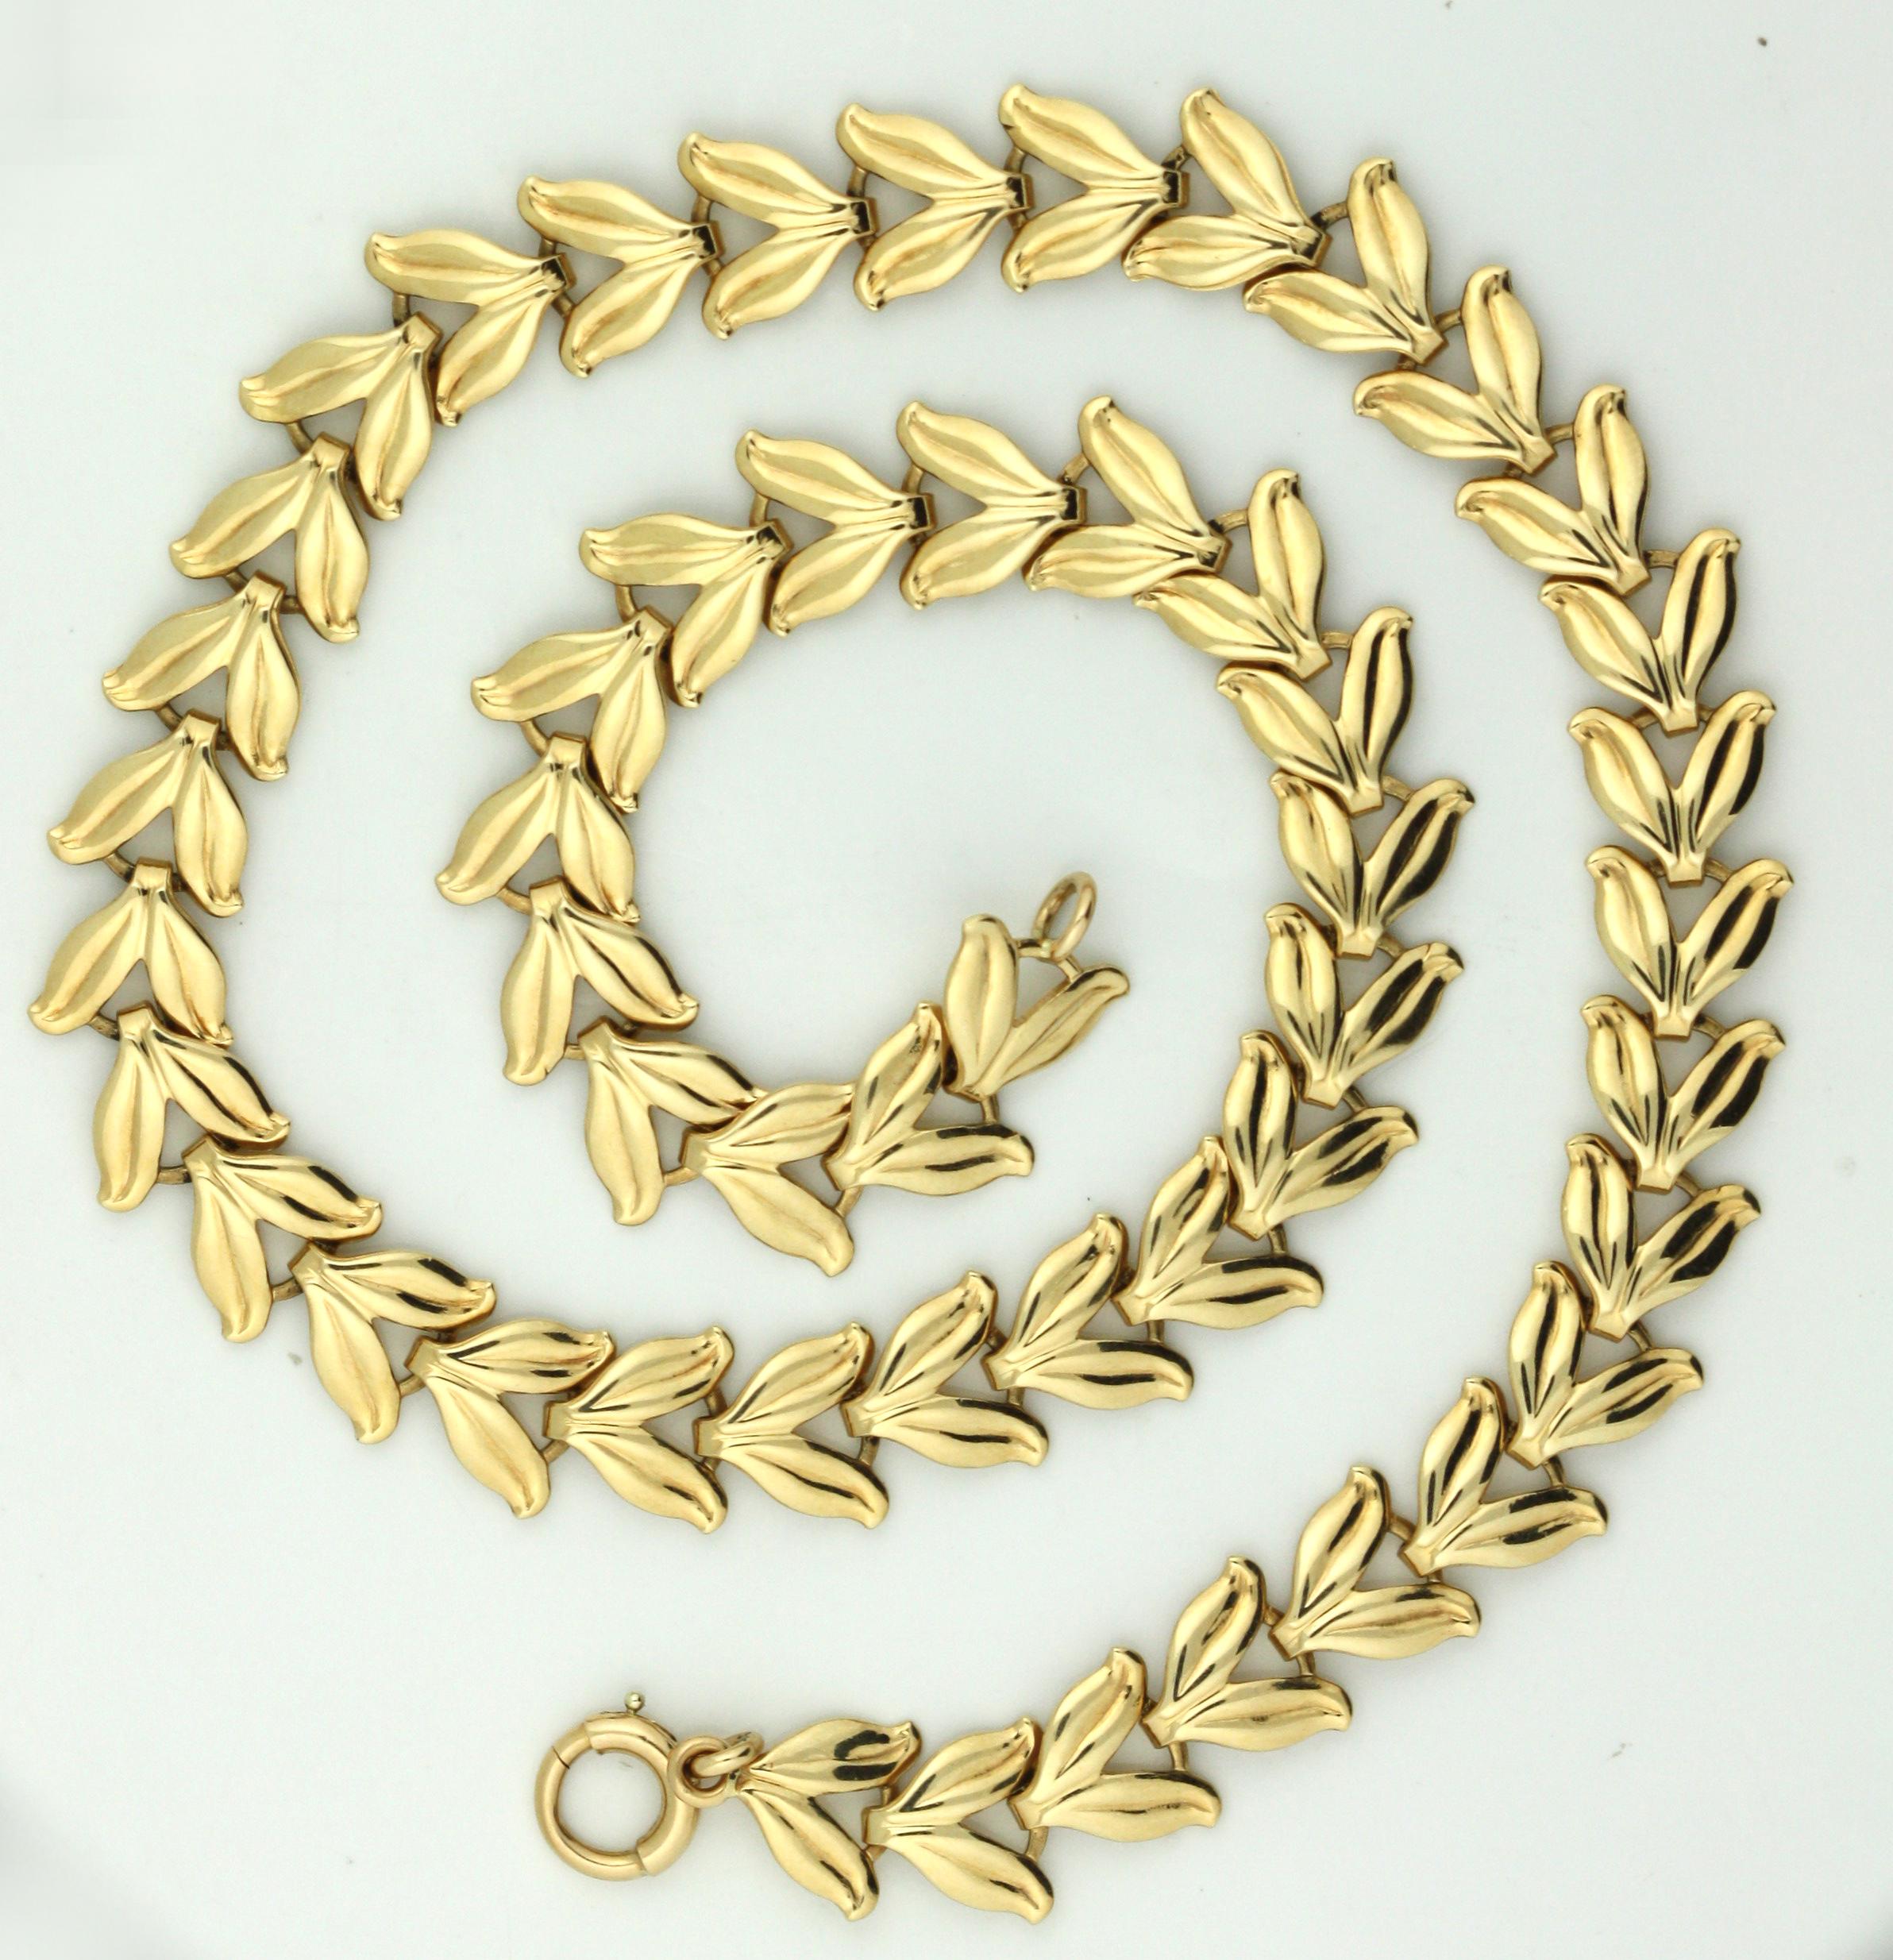 Leaf Design 14K Gold Choker Necklace In Excellent Condition For Sale In Lake Worth, FL